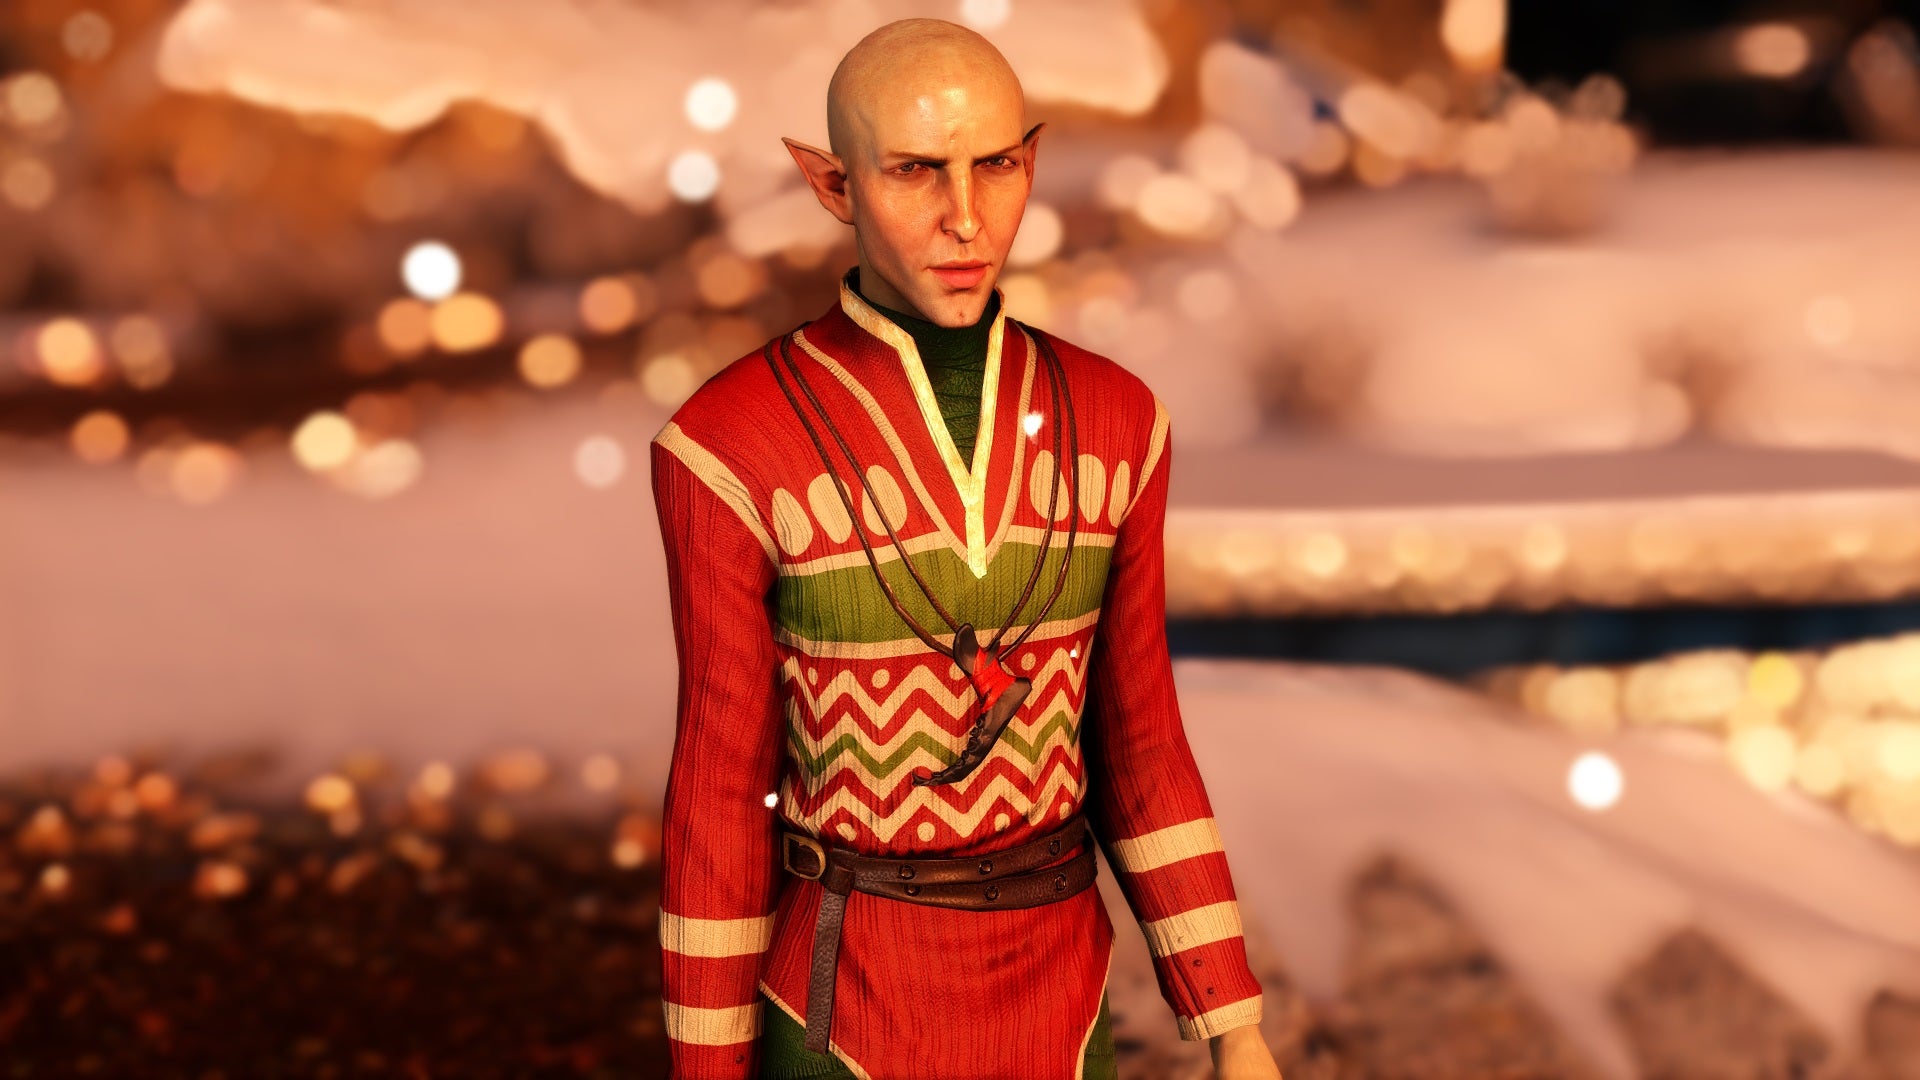 Dragon Age: Inquisition's Solas wearing an ugly Christmas sweater and frowning.